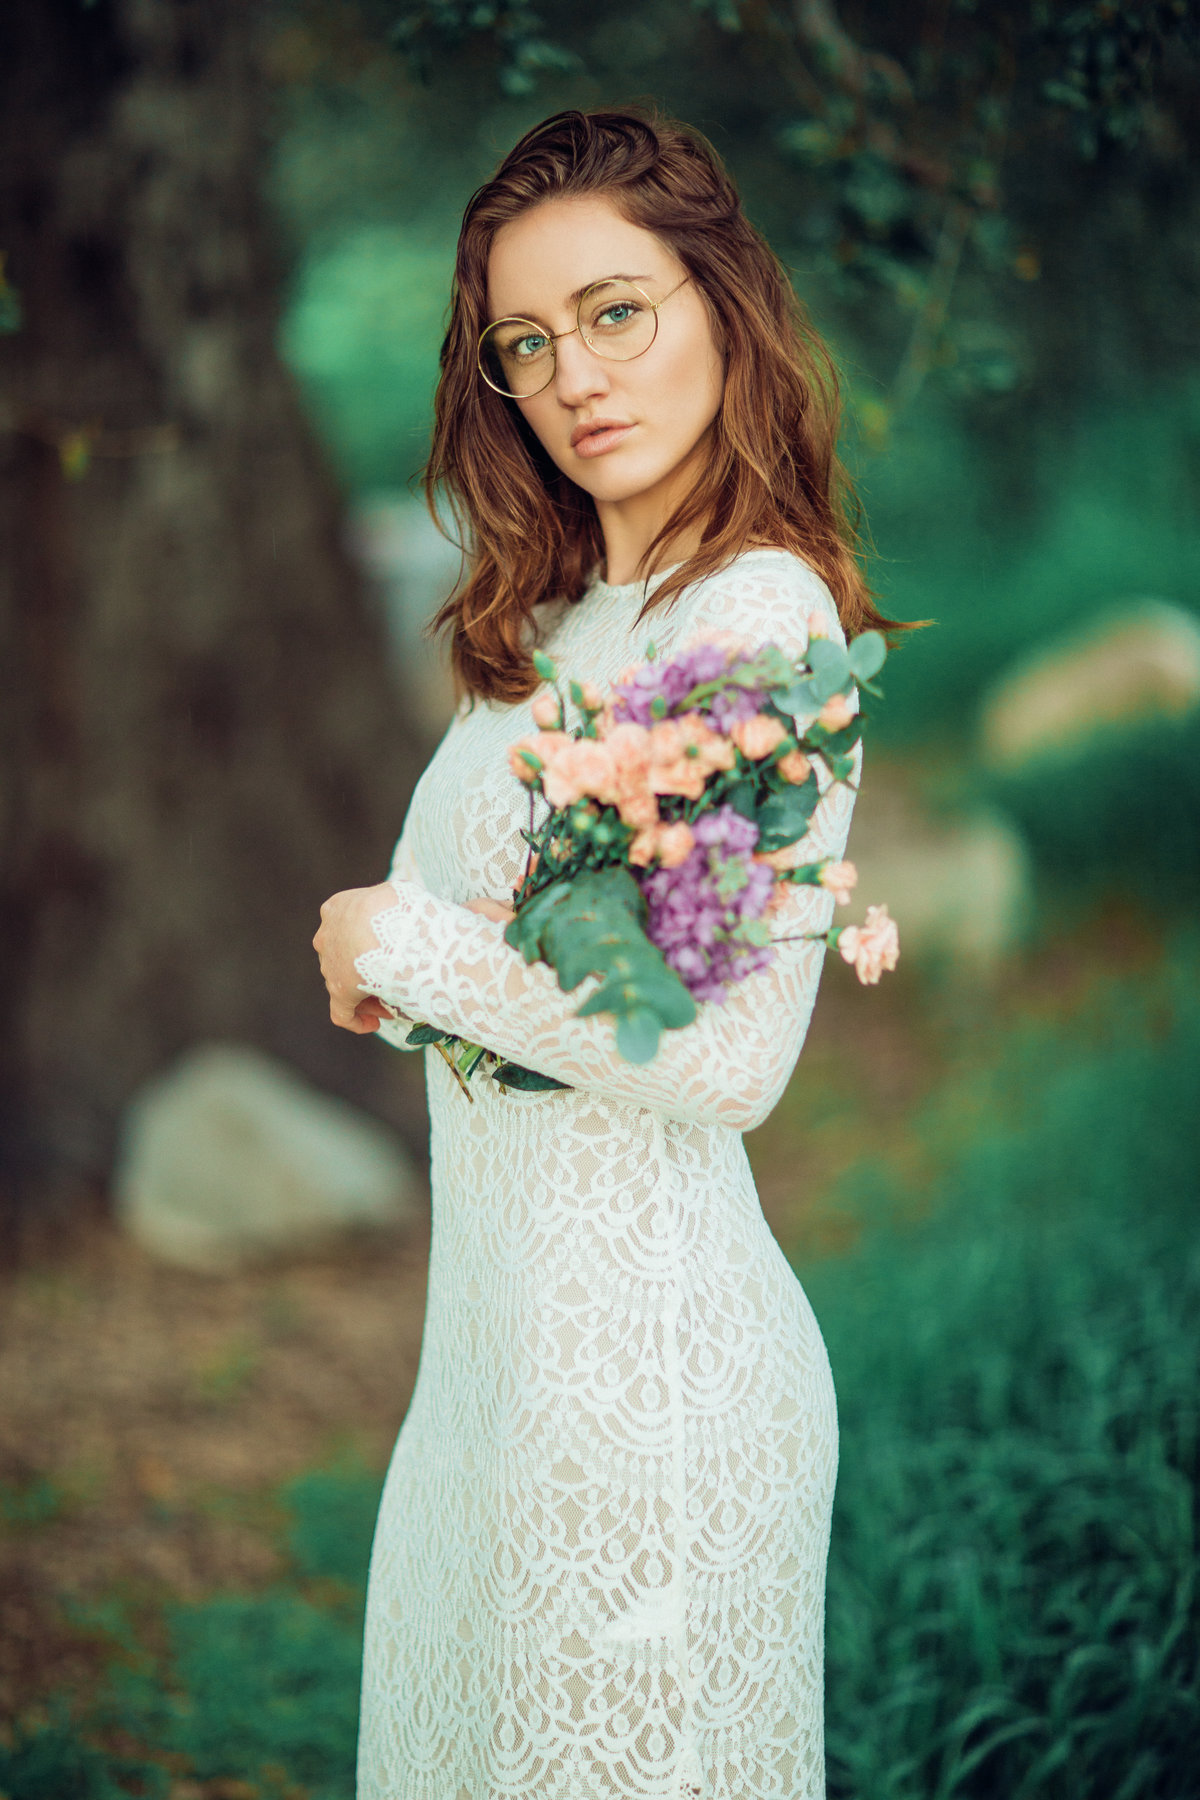 Young Woman Holding Flowers In Arms Portrait Photography